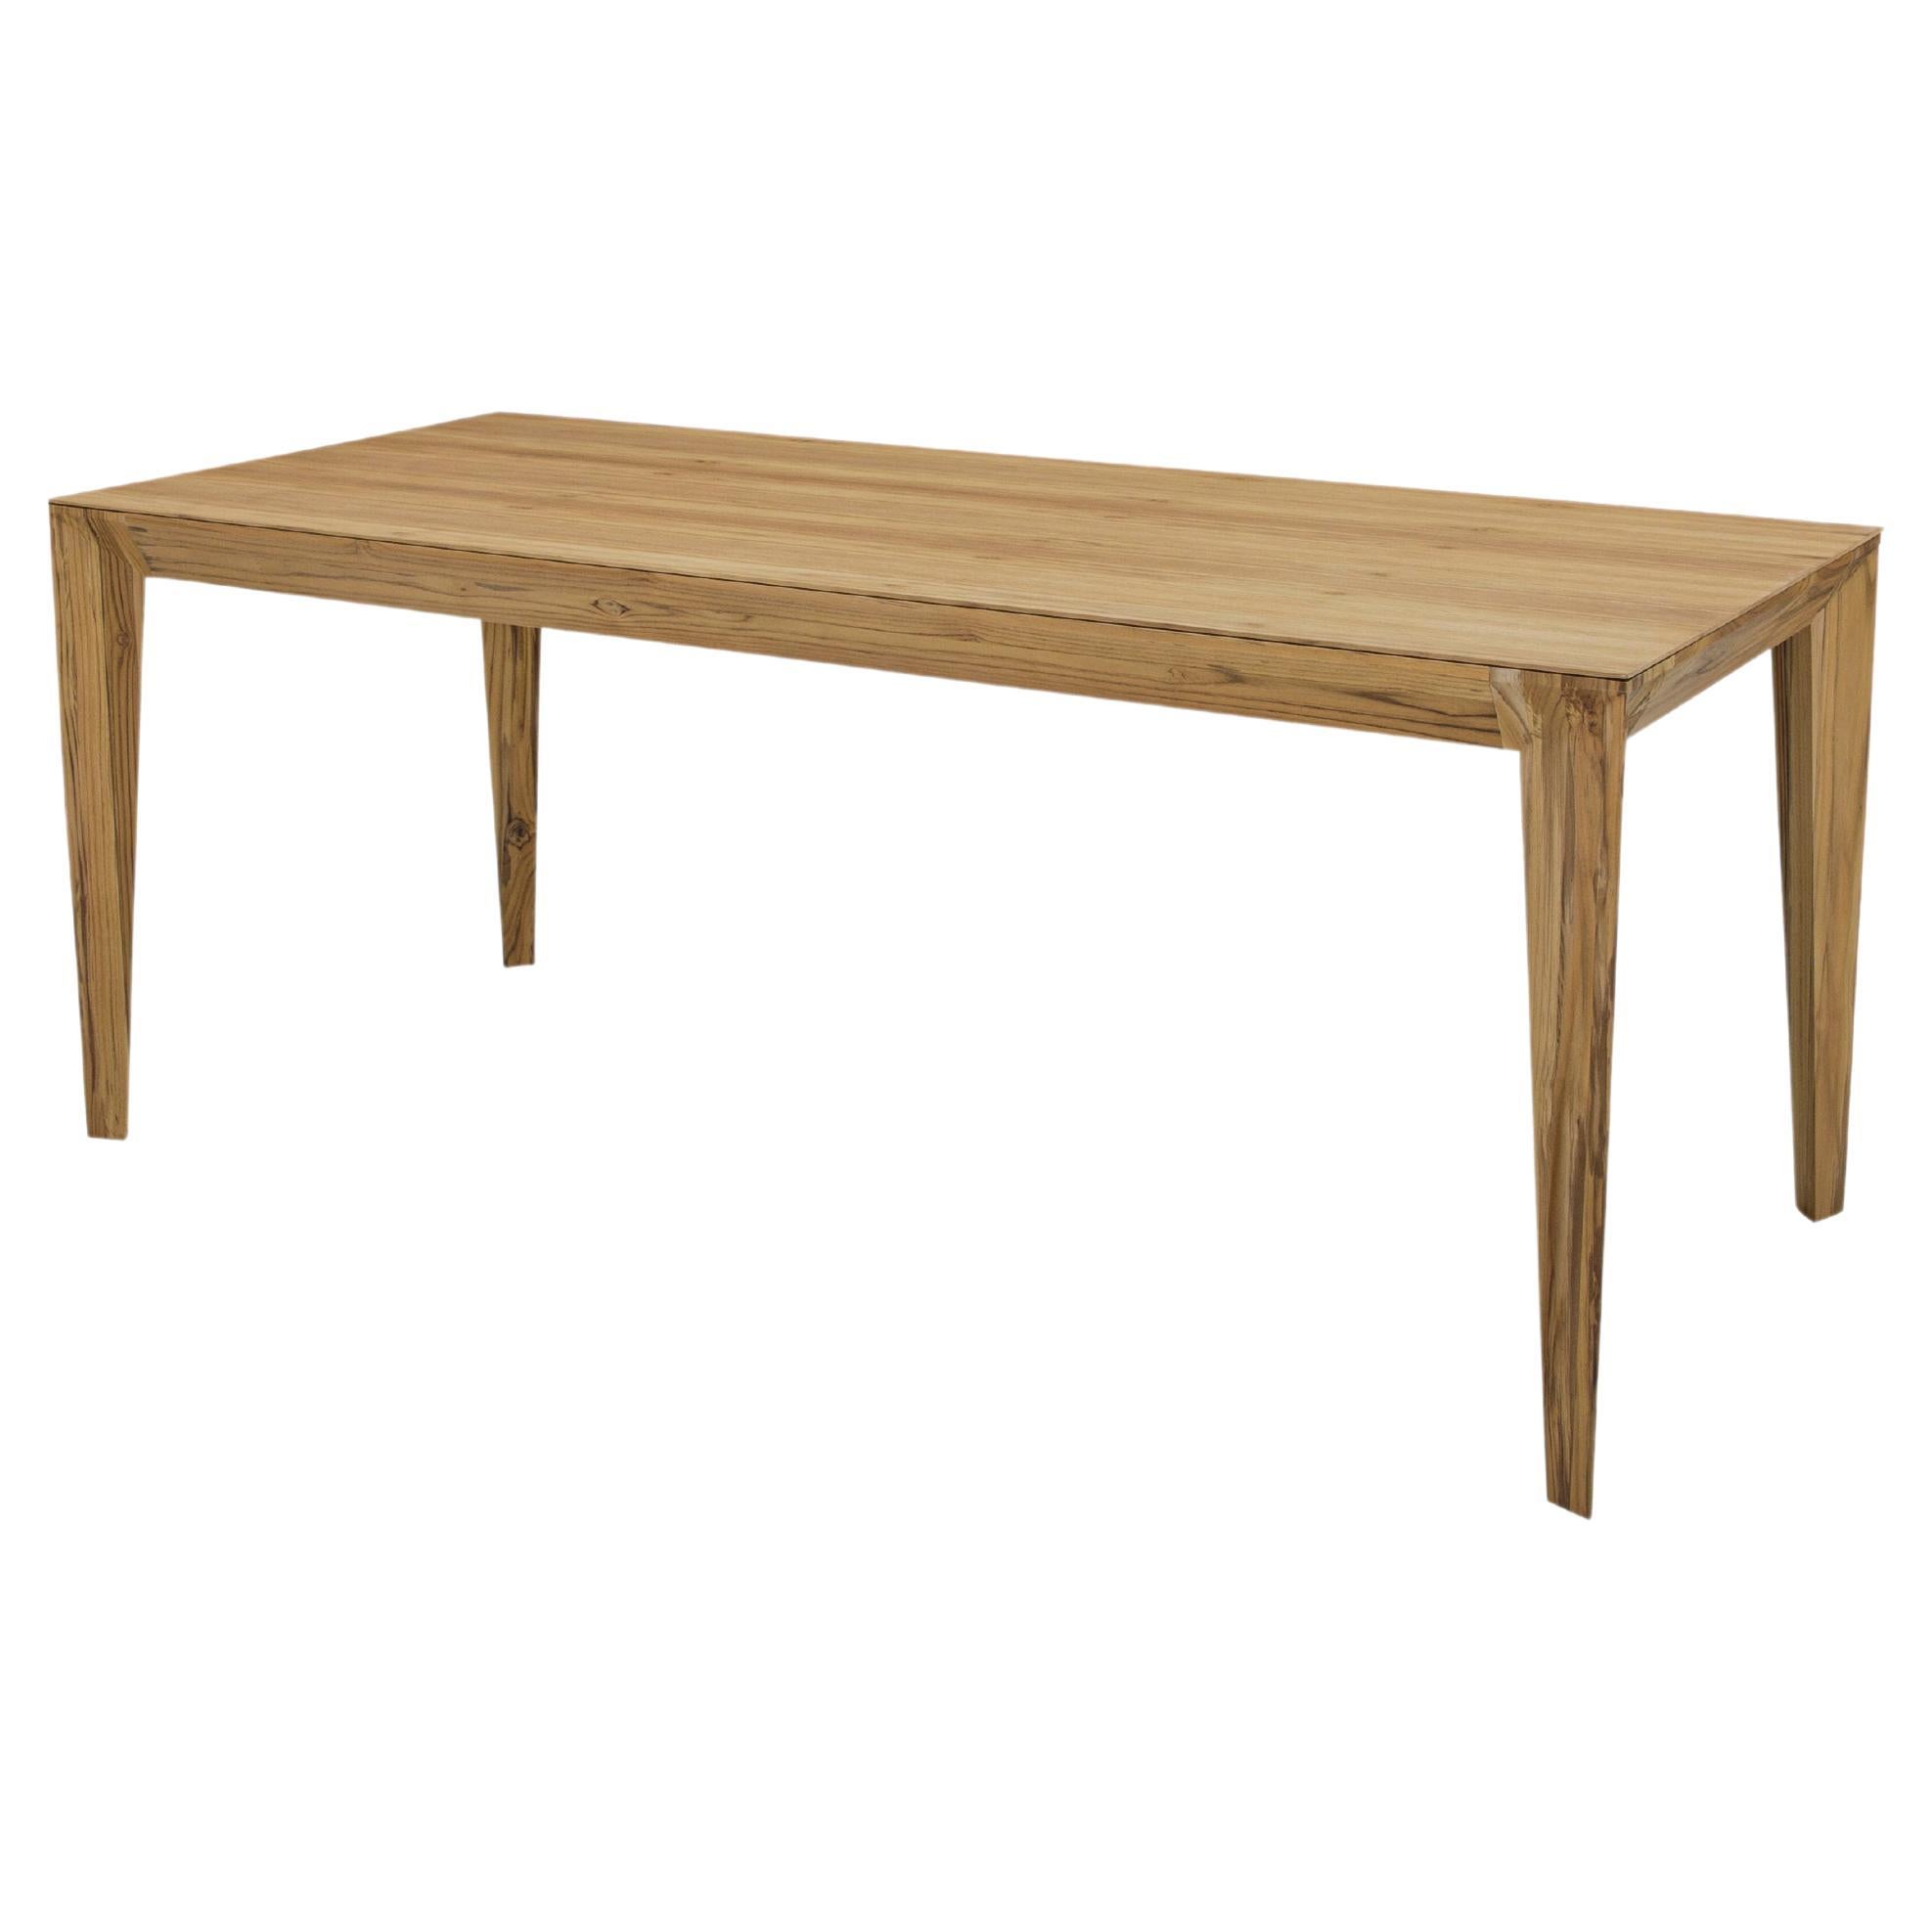 Luce Rectangular Dining Table with a Teak Wood Veneered Table Top 70''